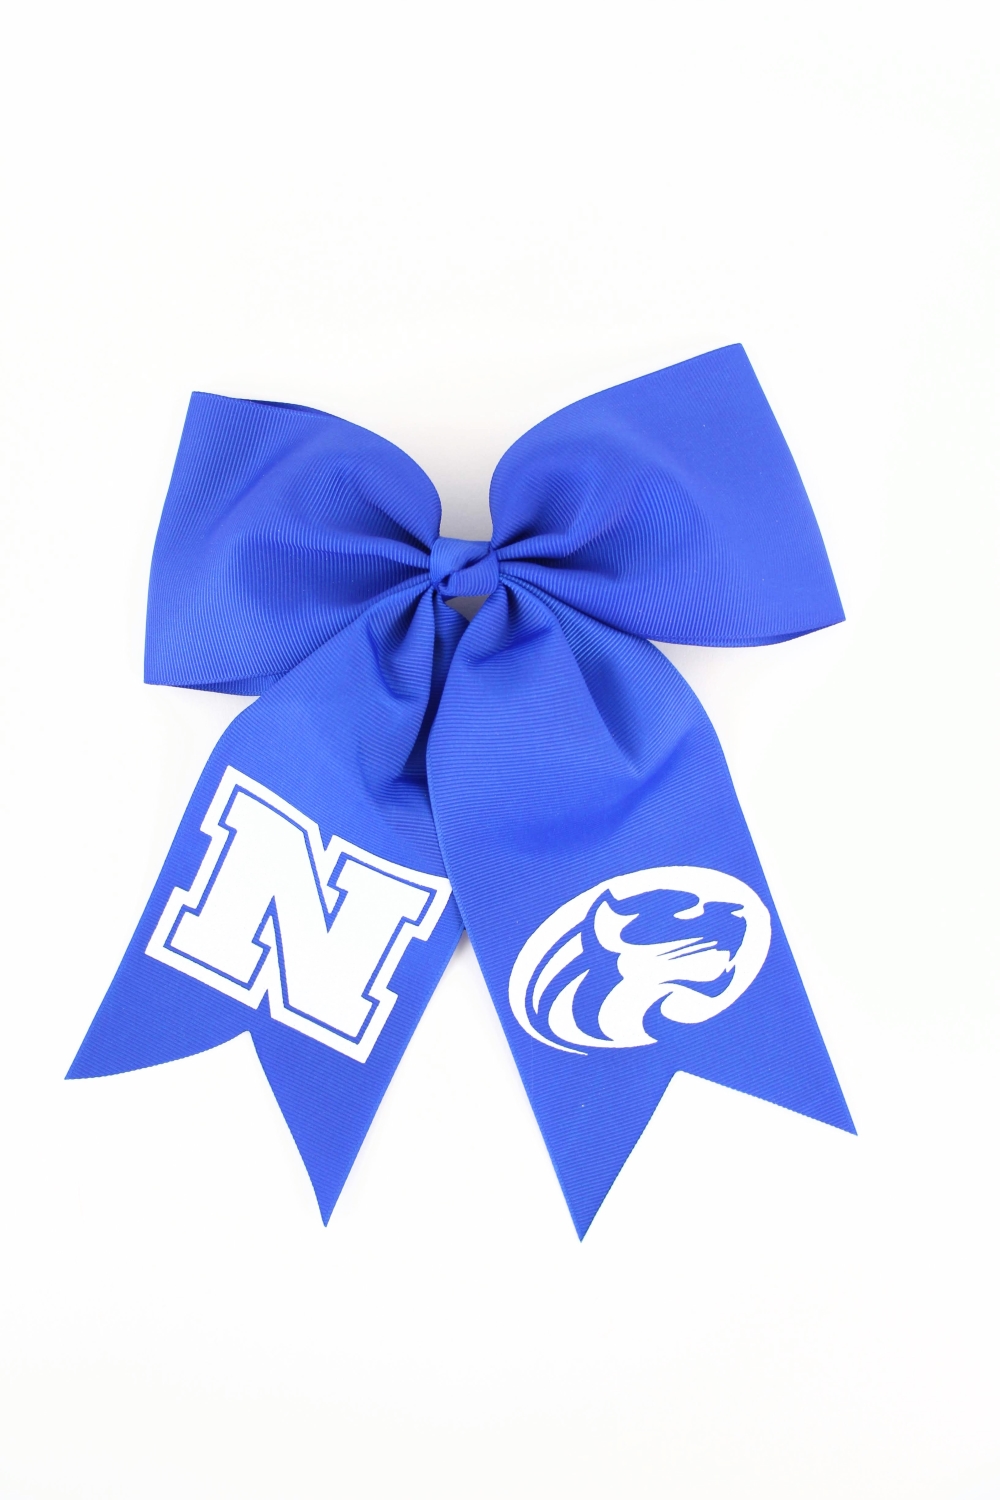 Handmade Cheer Bow, Projects